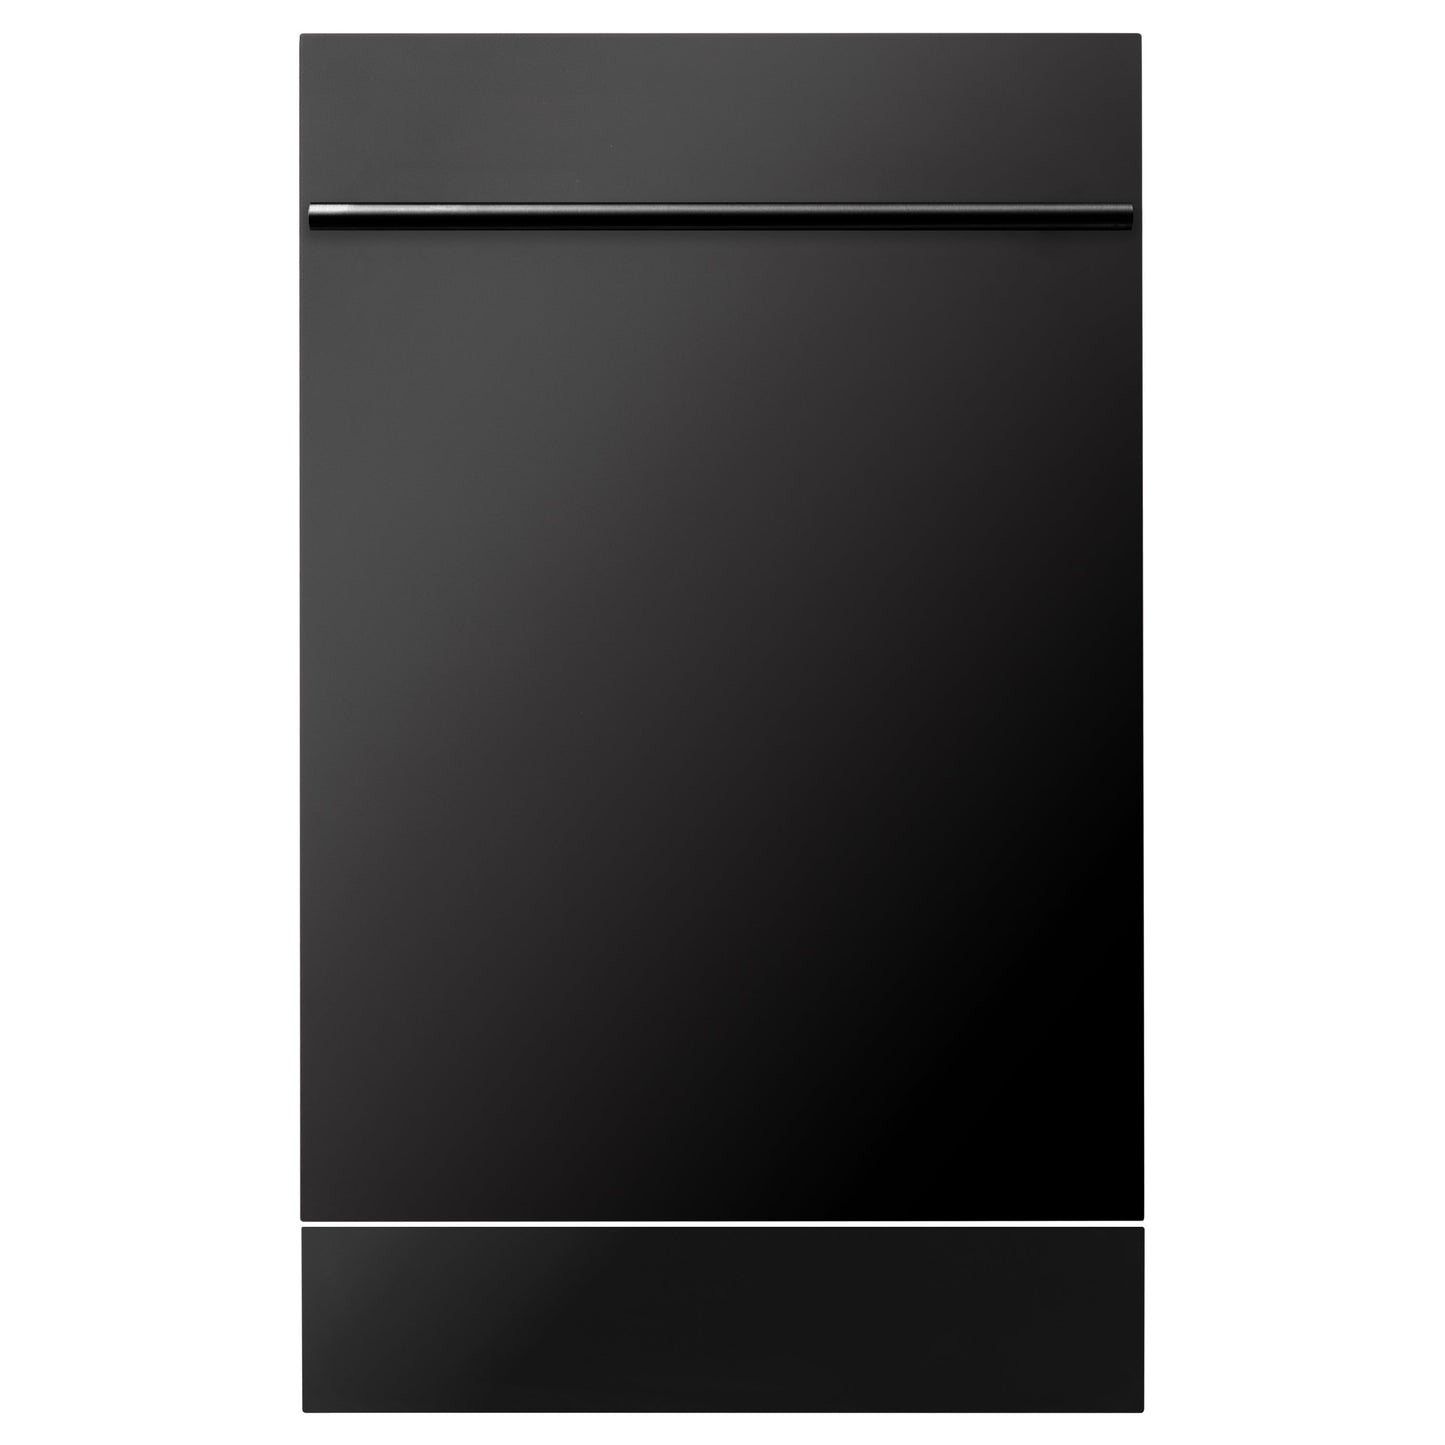 ZLINE 18 in. Compact Top Control Dishwasher with Black Stainless Steel Panel and Modern Style Handle, 52 dBa (DW-BS-H-18)